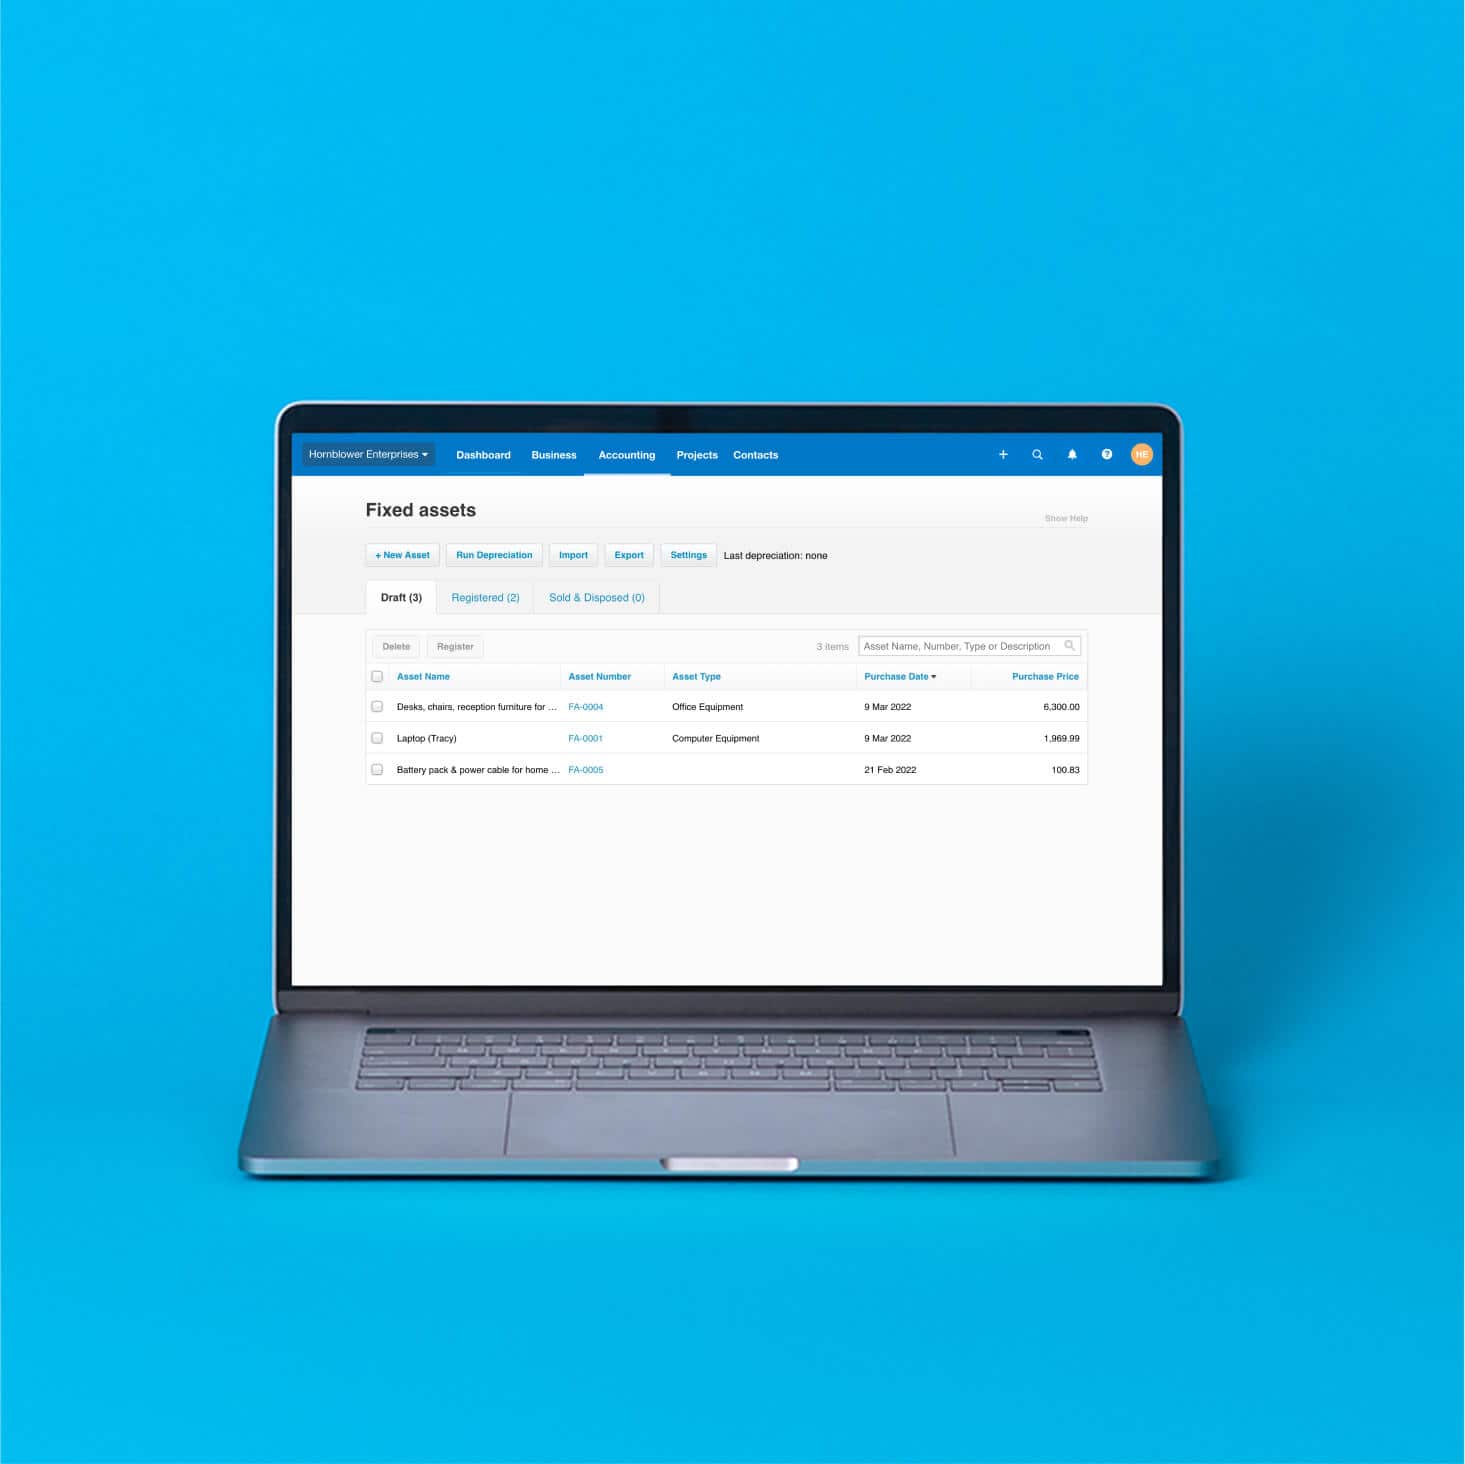 The fixed assets screen in Xero displays a list of assets along with their type, purchase date and price.